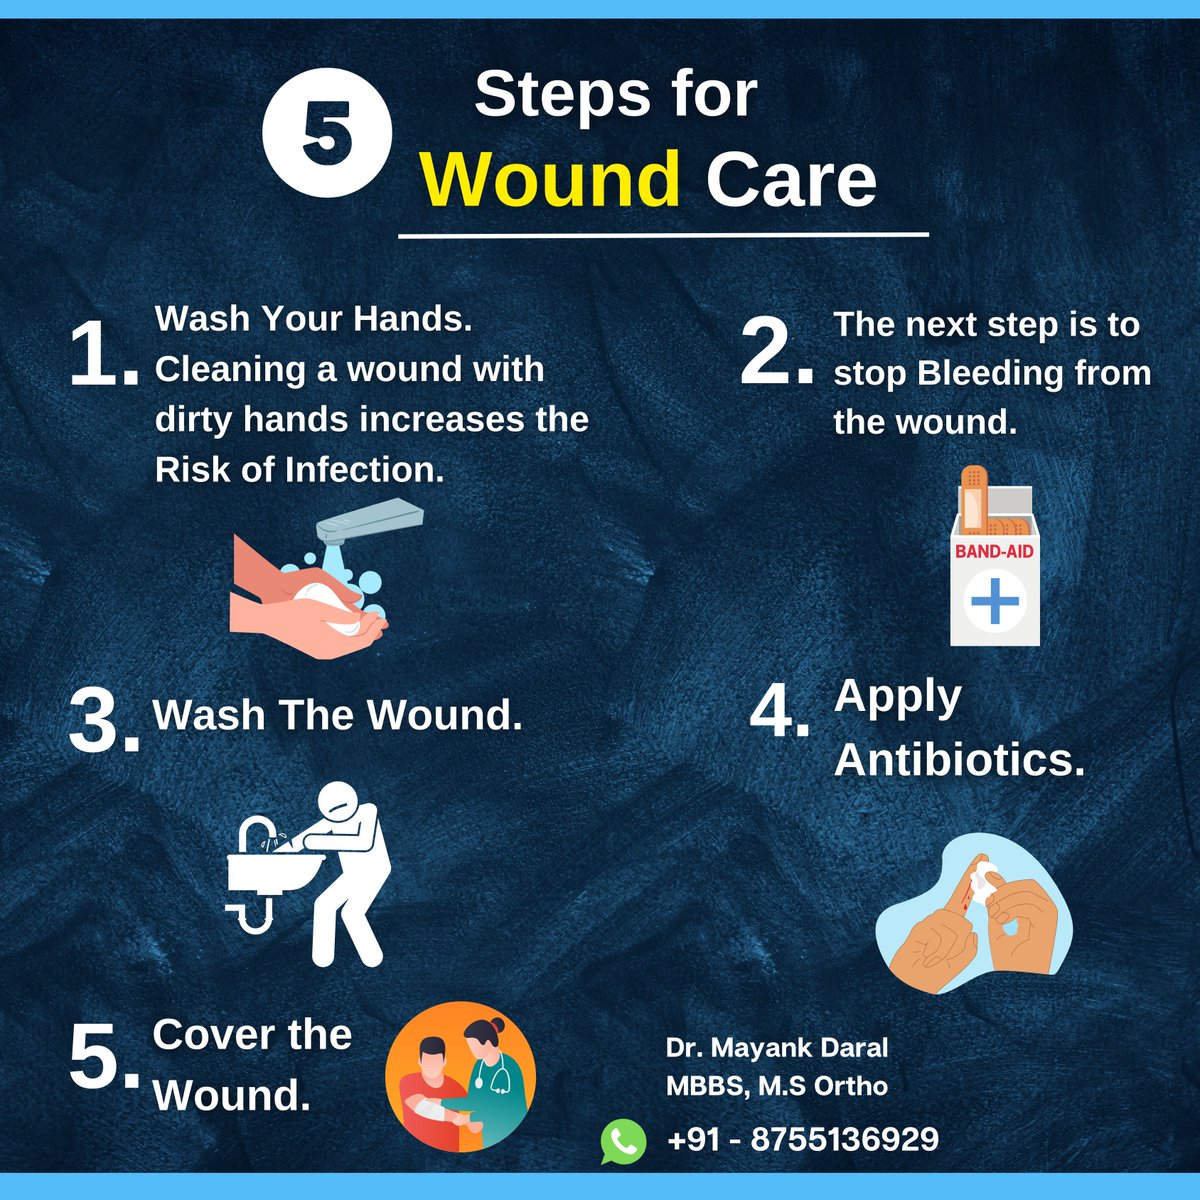 5 Steps for Wound Care.

#woundhealing #wounds #medicalknowledge